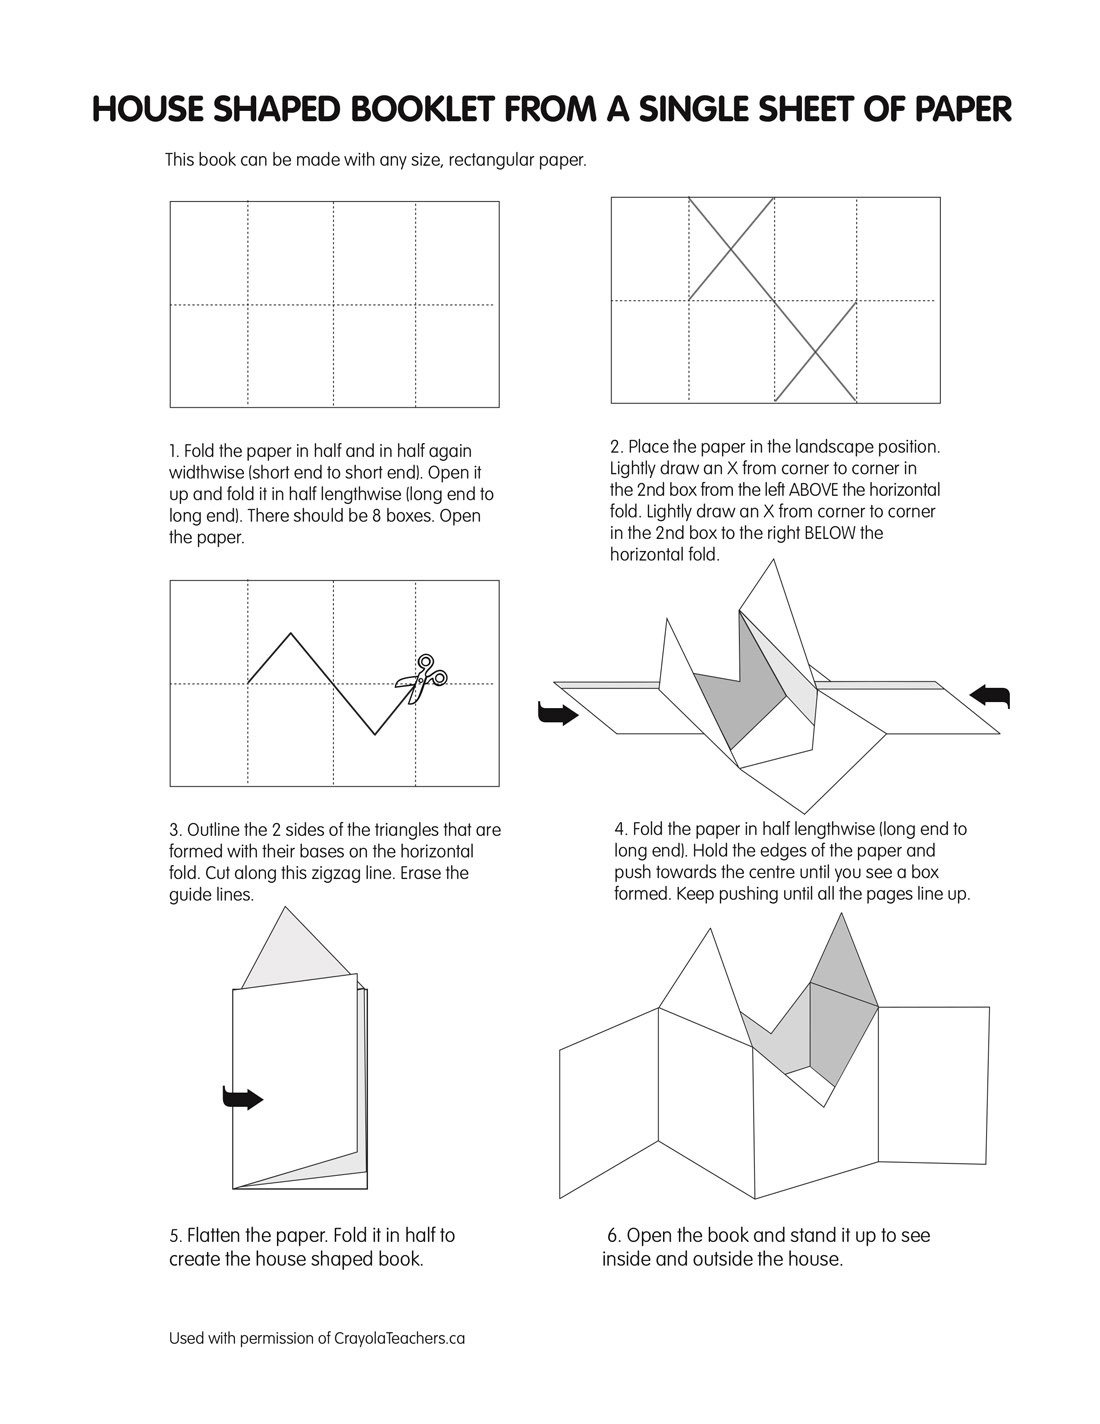 How to Make a House              Booklet